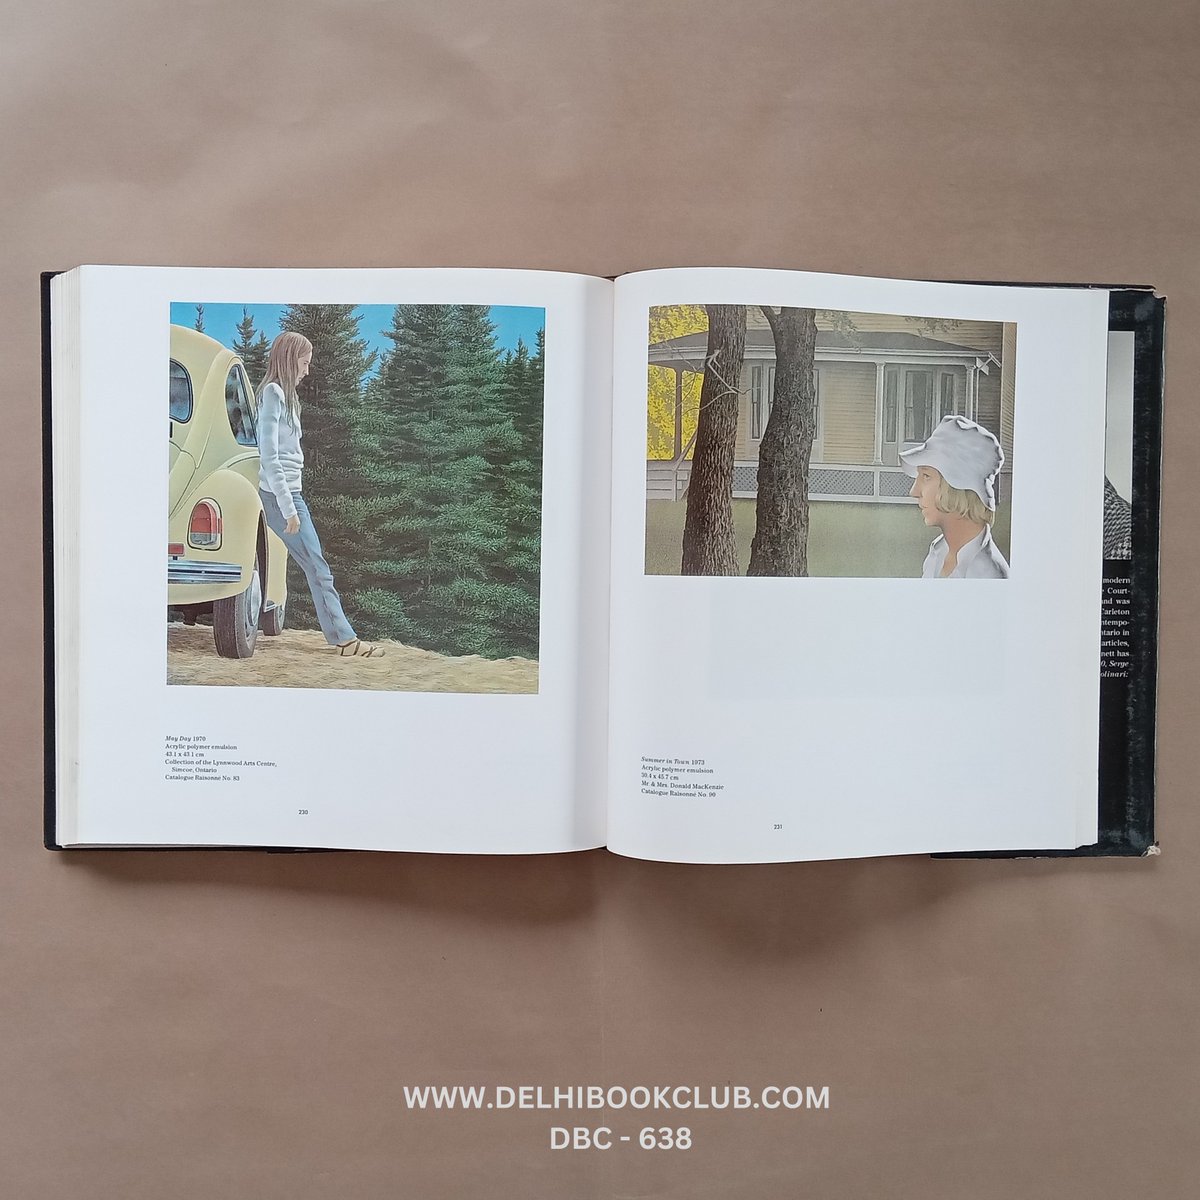 ISBN NO :-  0771017782
Book Name :-Colville
Author Name :- David burnett
Publisher :- ART GALLERY OF ONTARIO

DELHI BOOK CLUB

#delhibookclub  
#Colville #Davidburnett #ARTGALLERYOFONTARIO #FirstEdition #year1983 #Art 

#BOOKS